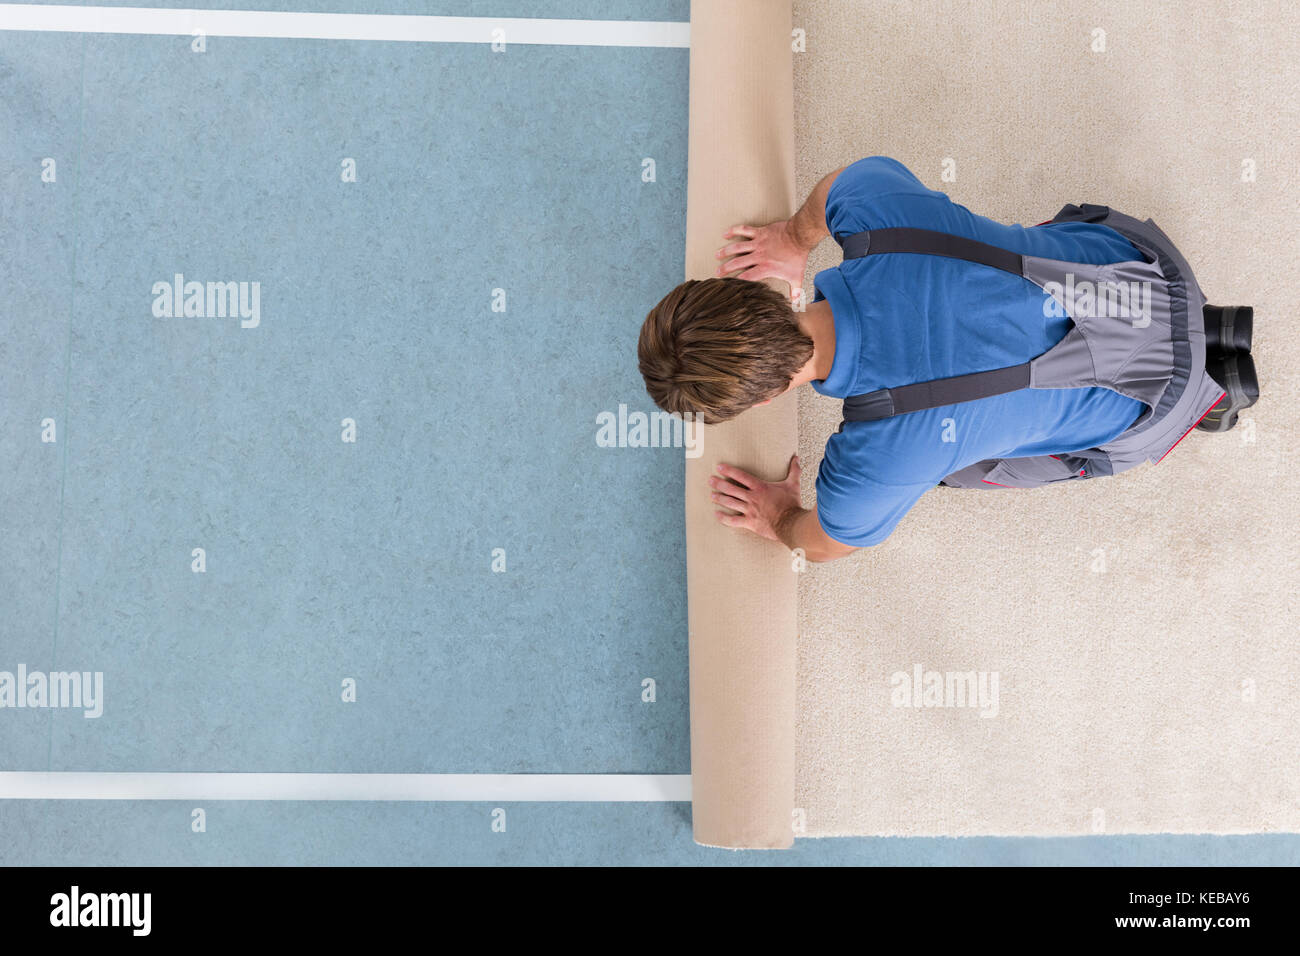 High Angle View Of Craftsman In Overalls Unrolling Carpet On Floor Stock Photo